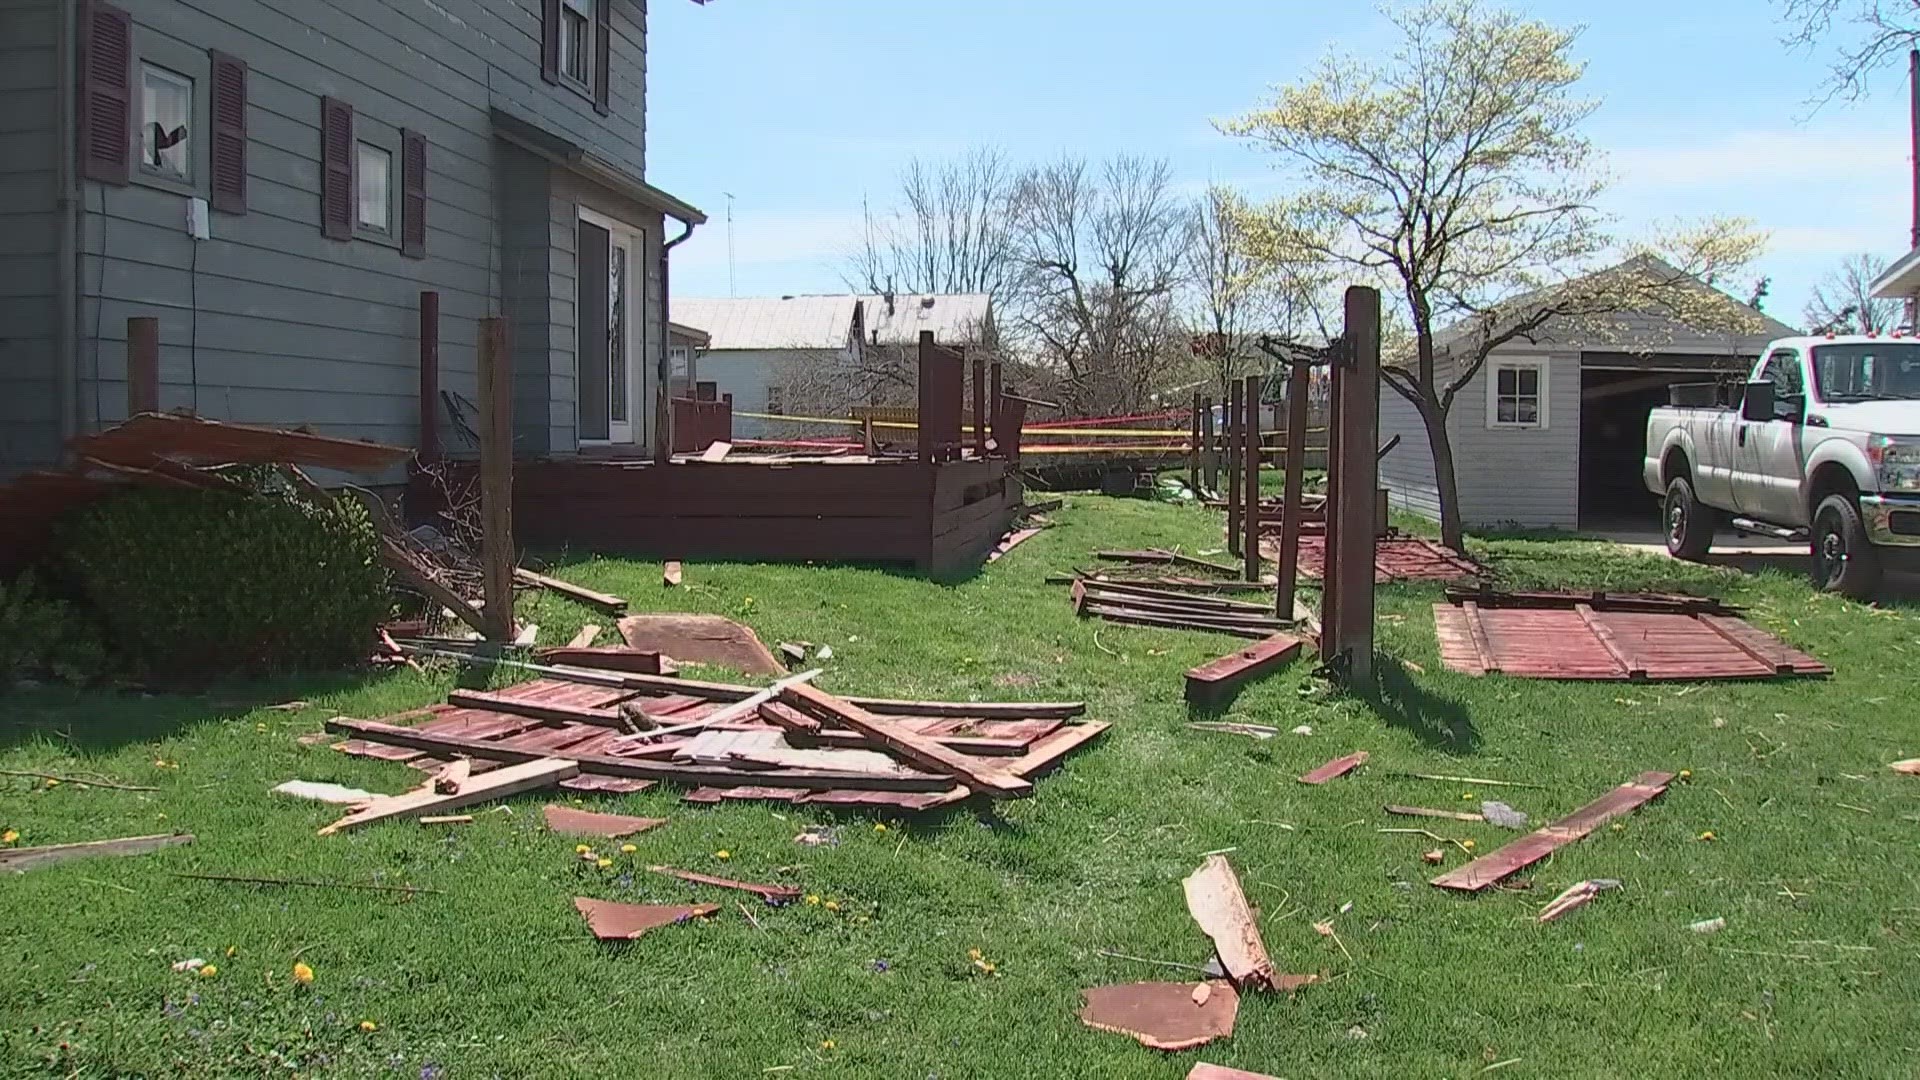 Cleanup is underway in Bucyrus after the National Weather Service confirmed an EF1 tornado with wind gusts up to 110 mph hit the area on Wednesday.